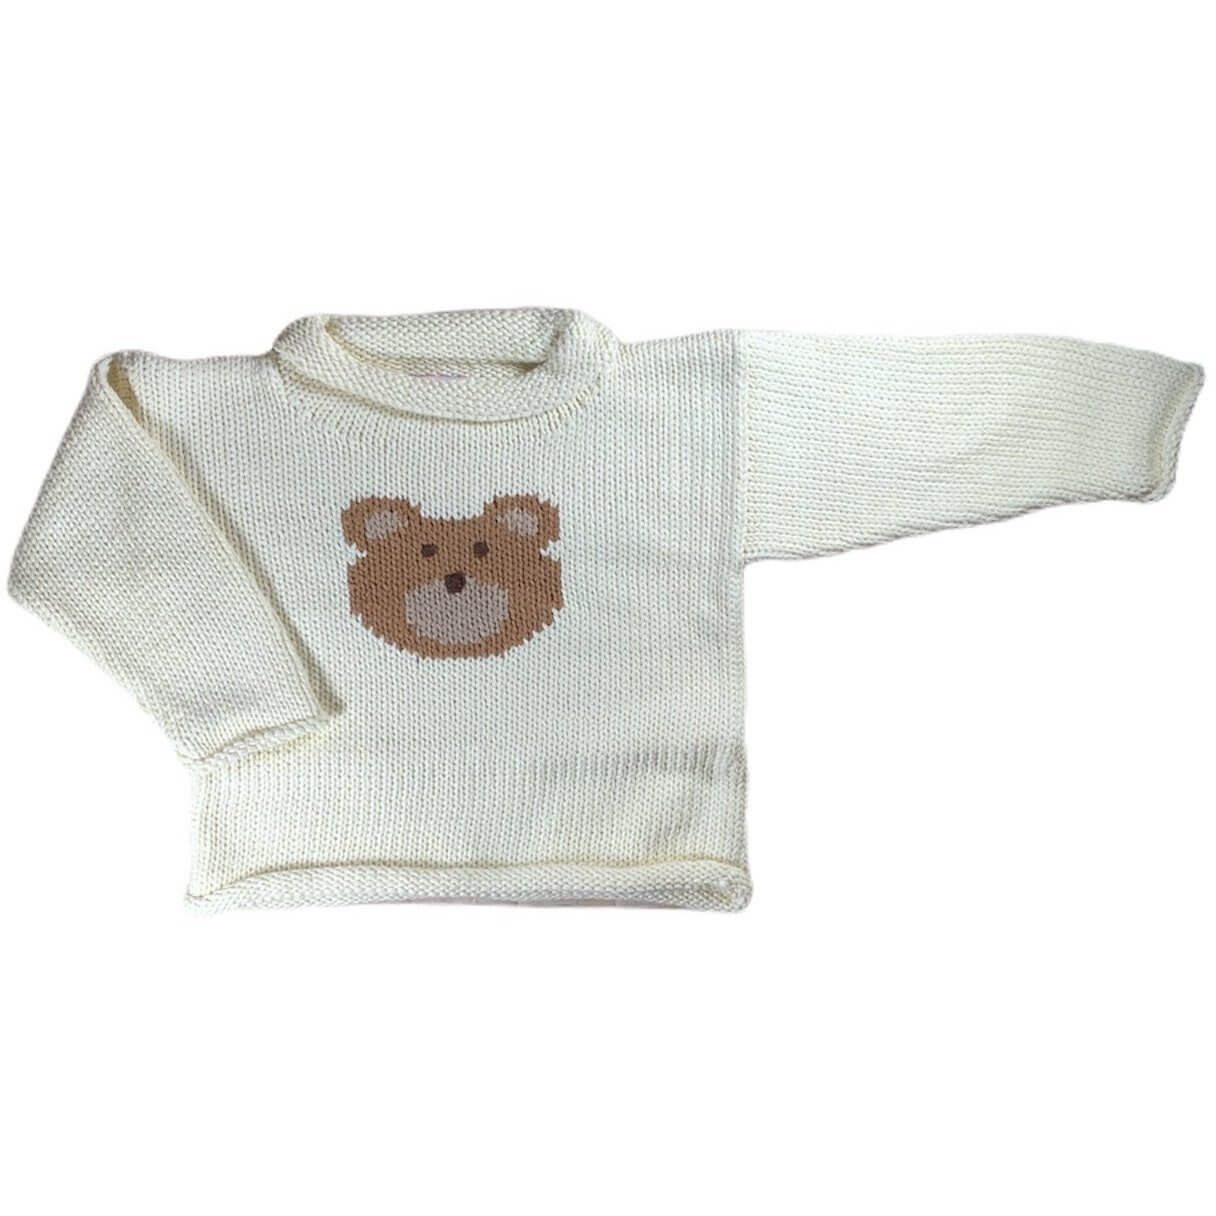 ivory roll neck sweater with tan bear face knitted on front center